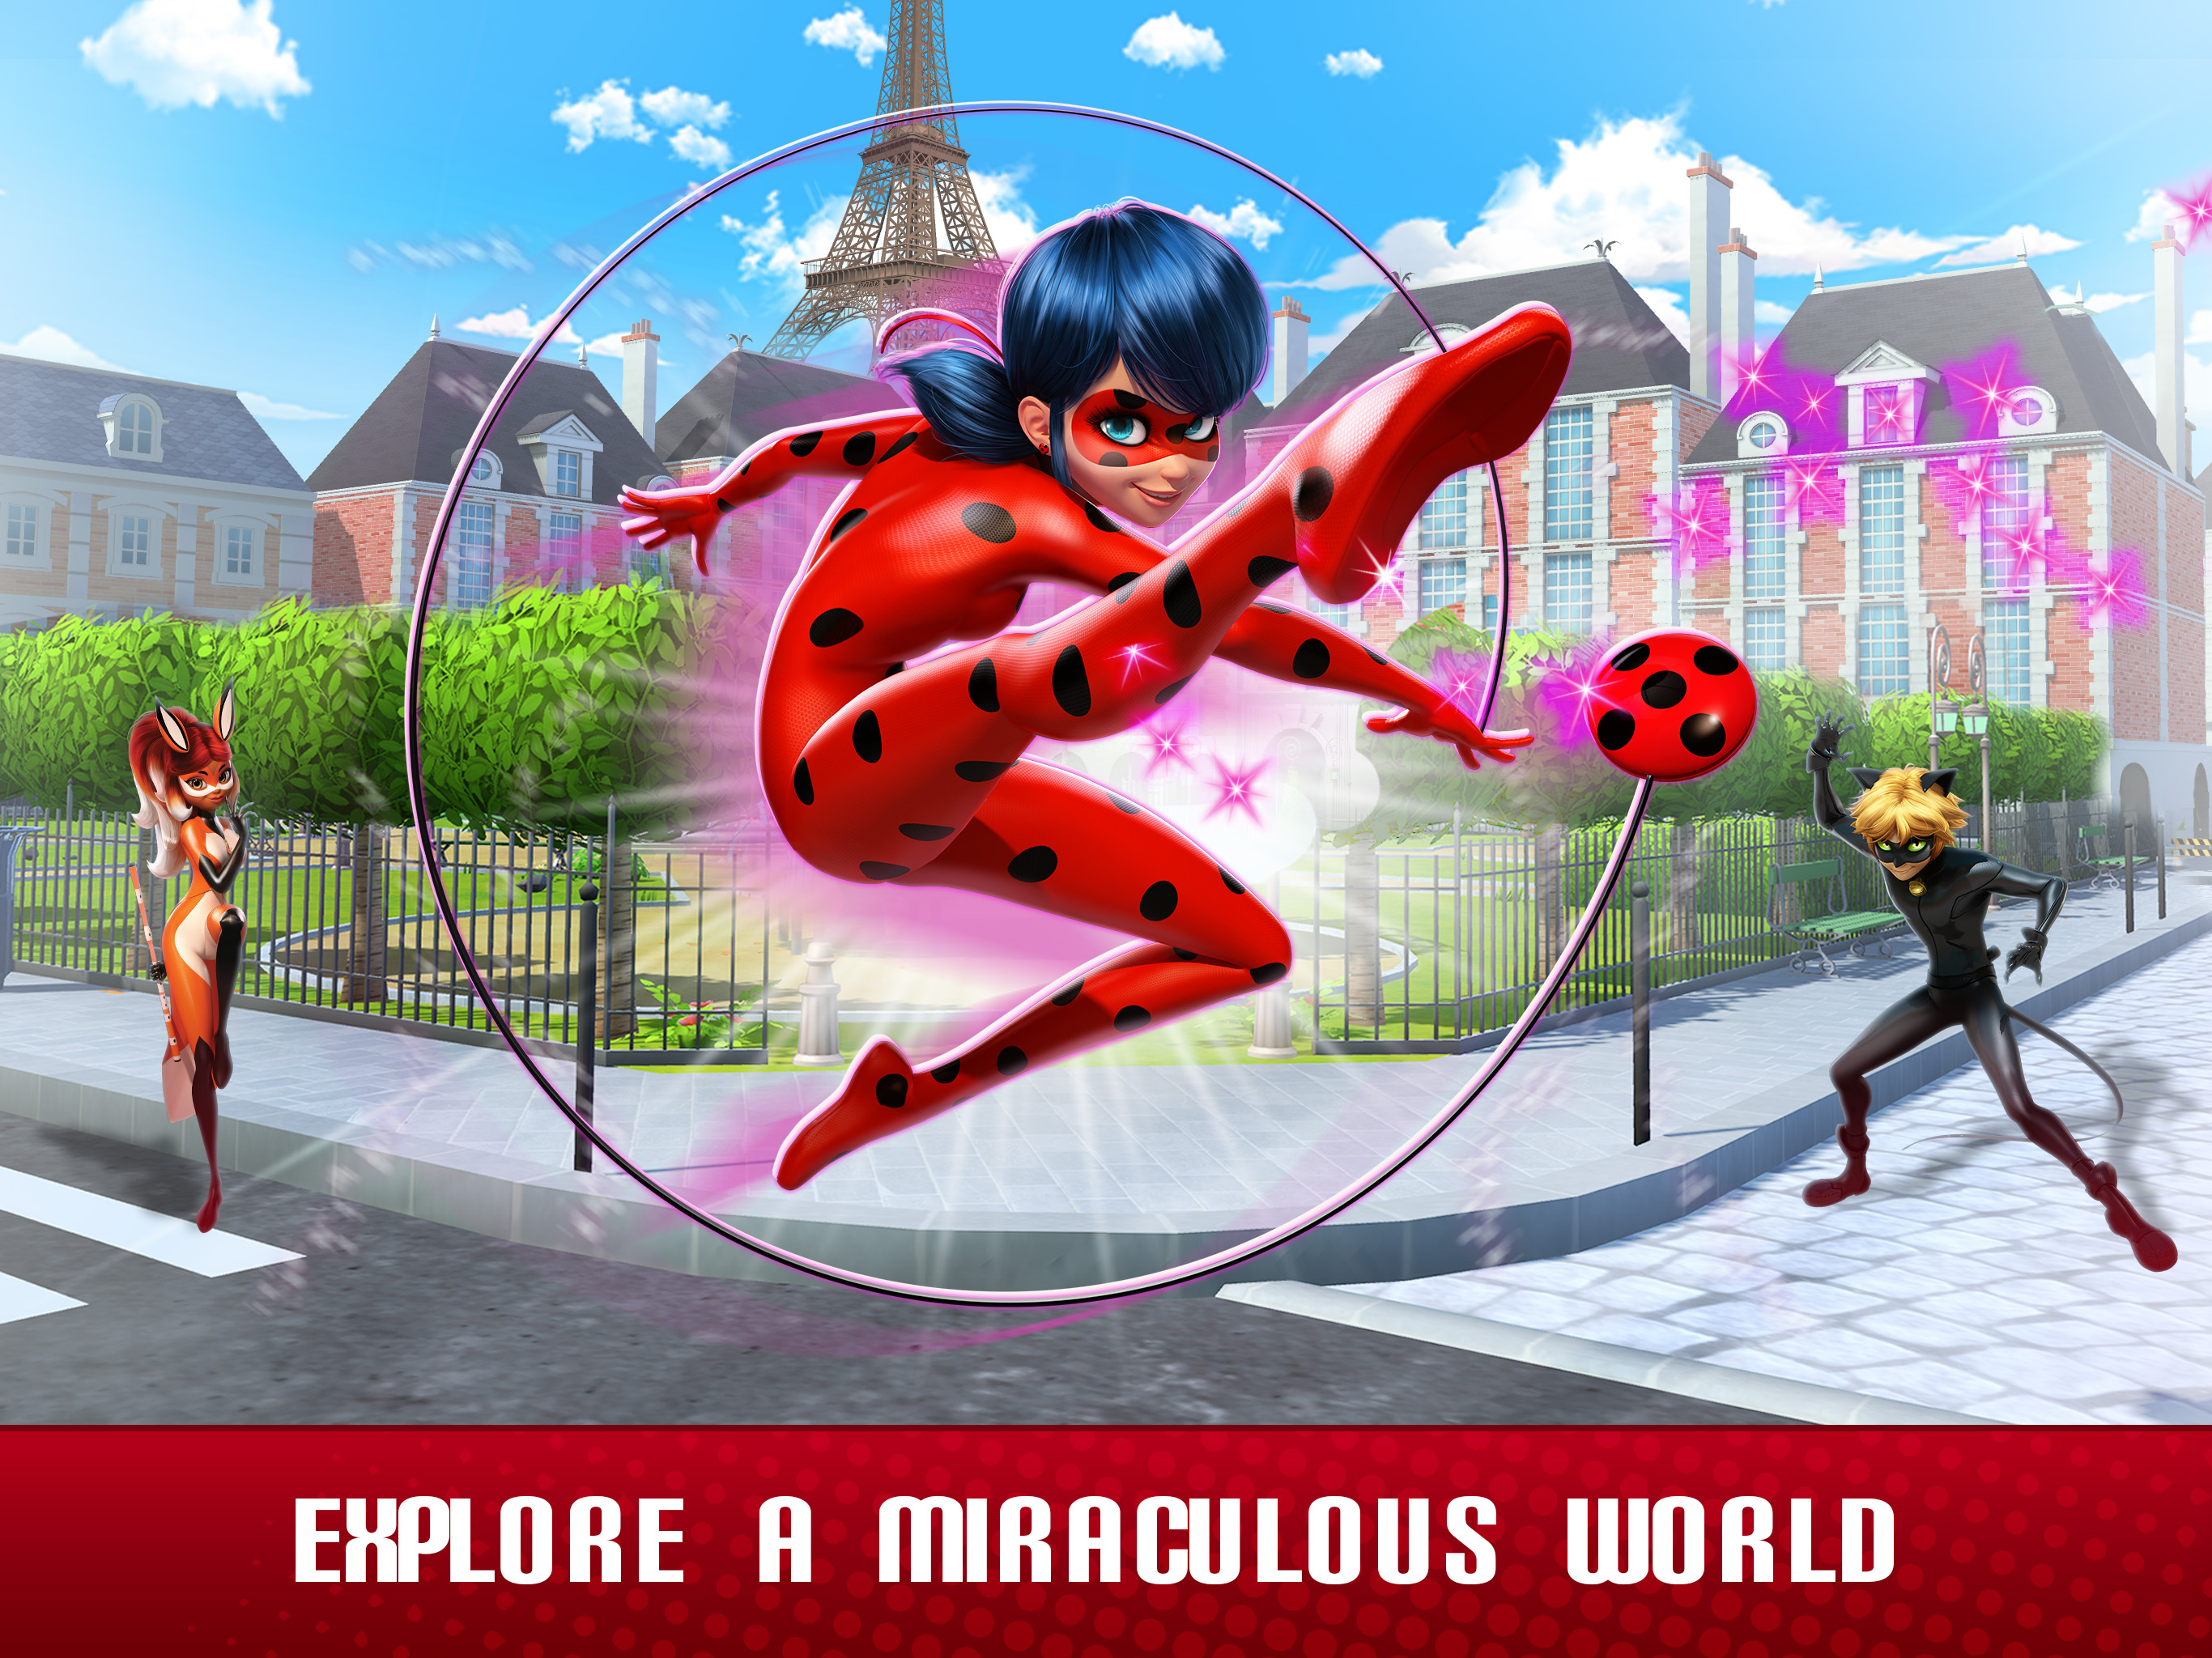 🔥 Download Miraculous Life 2023.4.0 [Unlocked] APK MOD. A fun adventure  game with characters from the animated series of the same name 